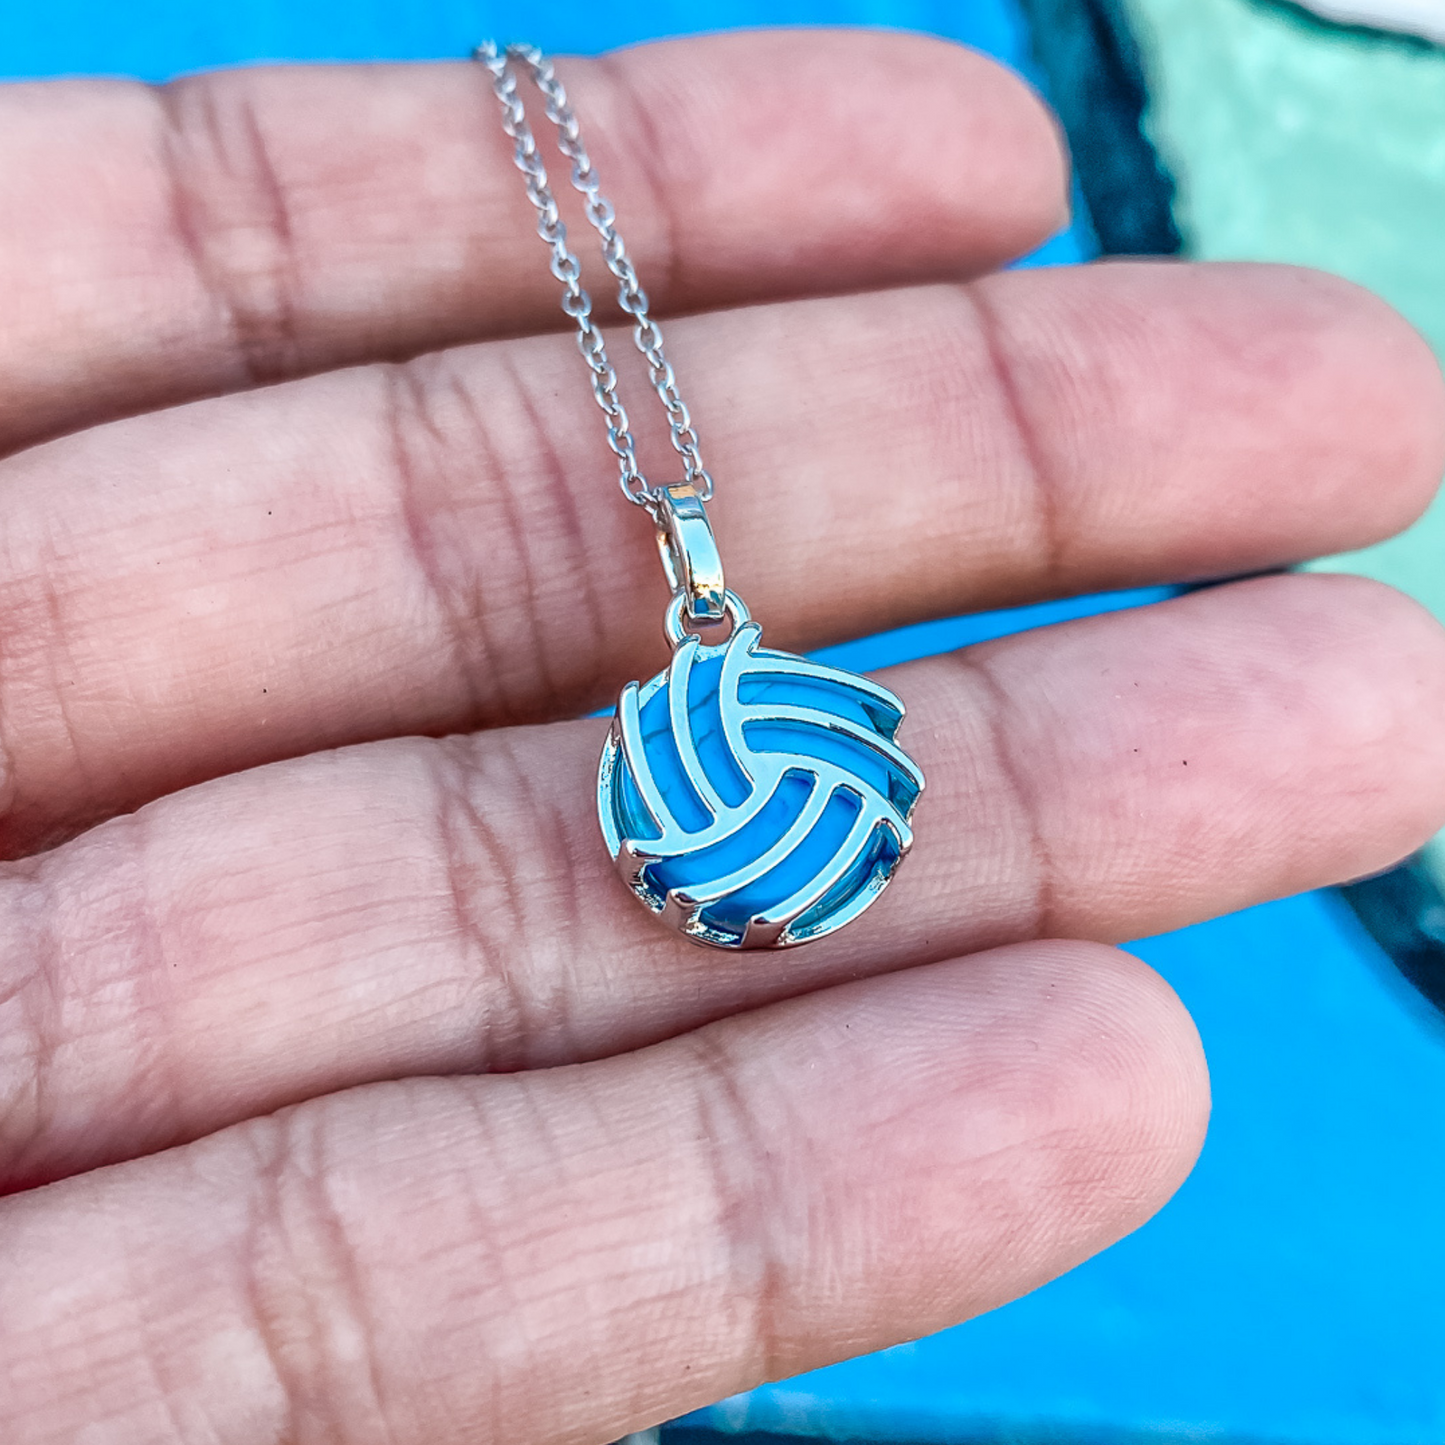 Volleyball charm necklace, handmade jewelry made by born to rock jewelry